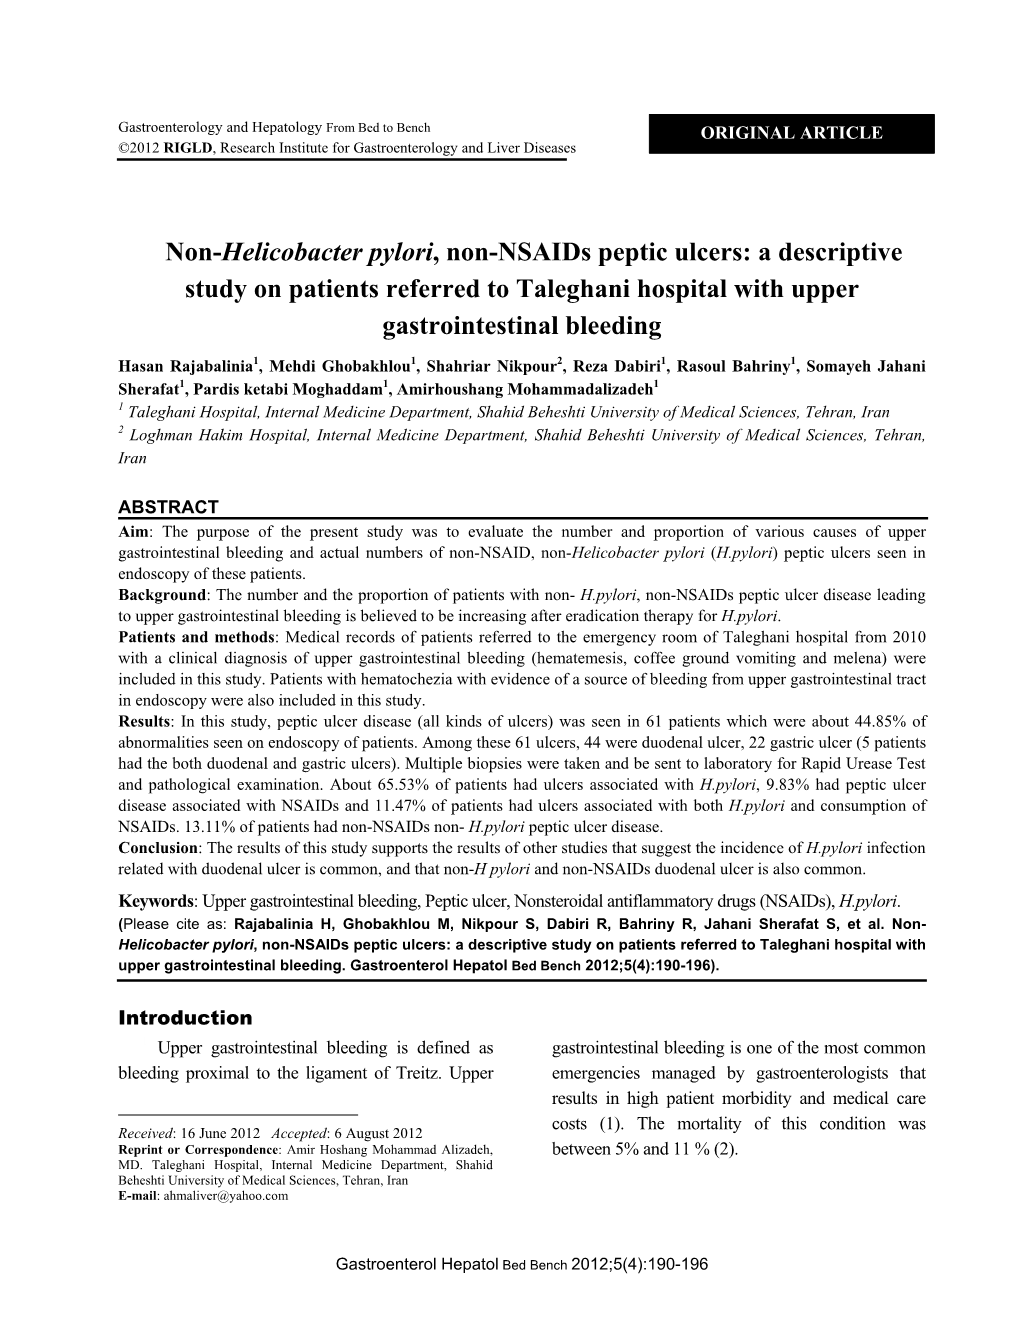 Non-Helicobacter Pylori, Non-Nsaids Peptic Ulcers: a Descriptive Study on Patients Referred to Taleghani Hospital with Upper Gastrointestinal Bleeding